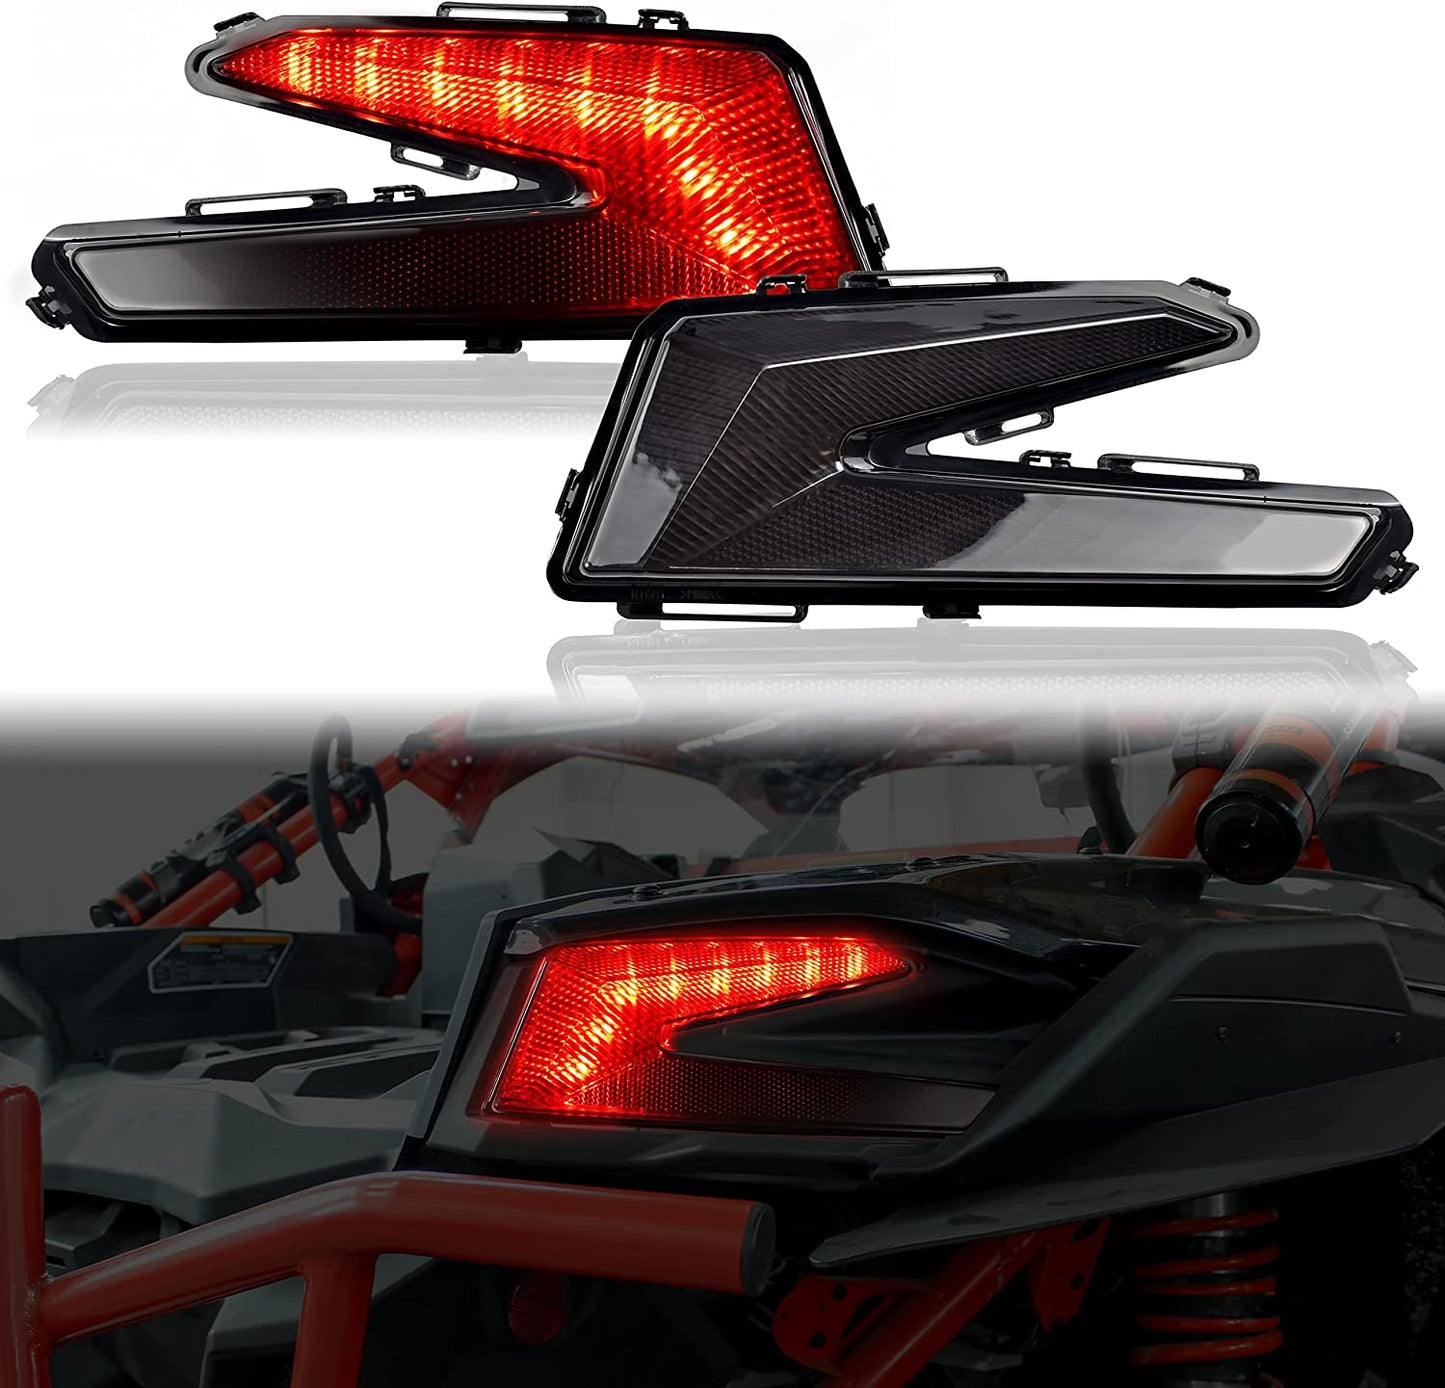 LED Rear Tail Lights for Can Am X3,Can-Am Maverick X3 XDS XRS Max Turbo R 2017-2022